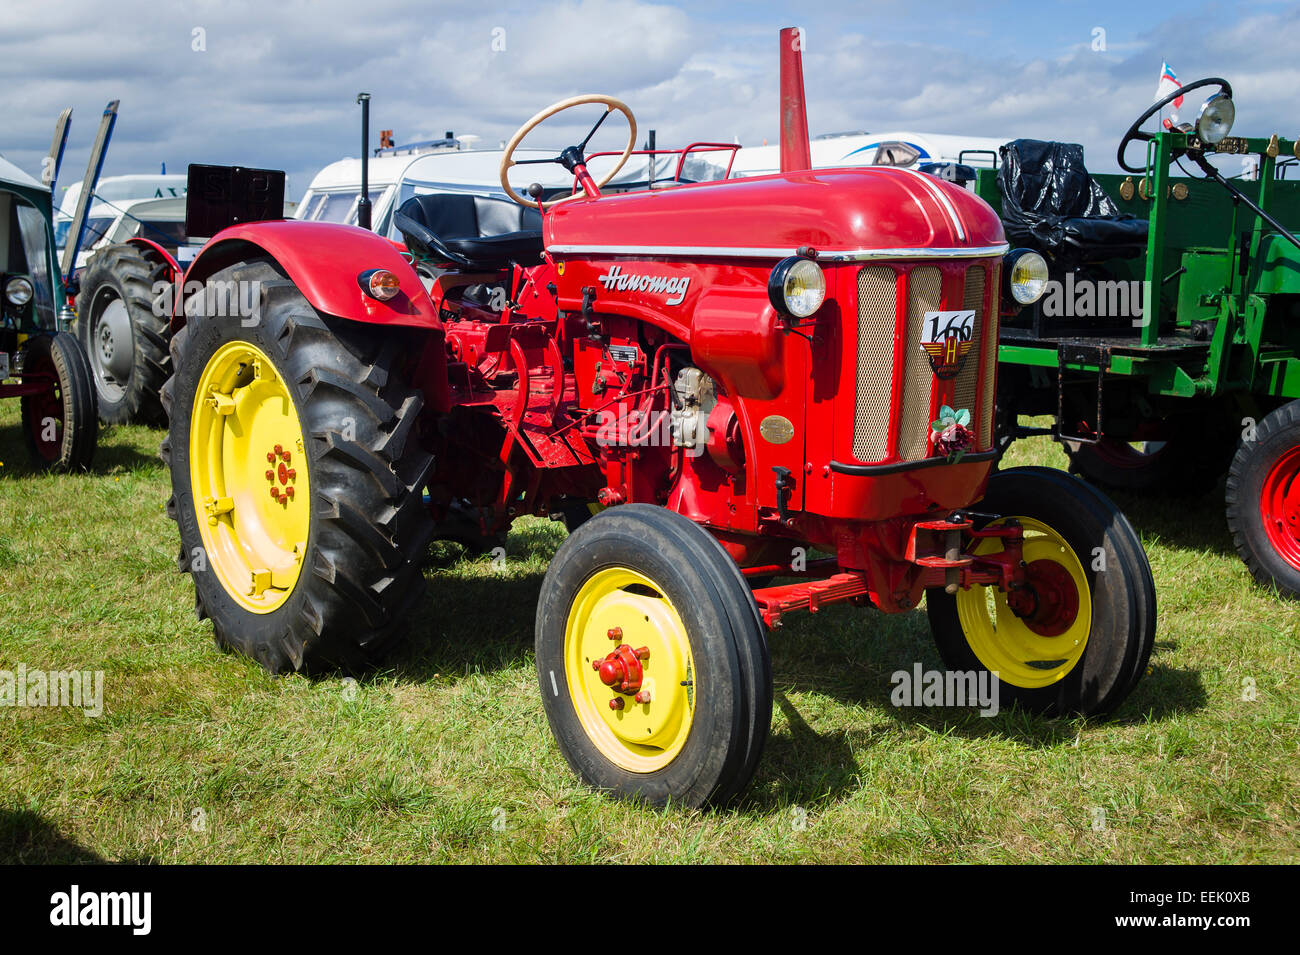 Old German Hanomag R425 tractor at an English show Stock Photo